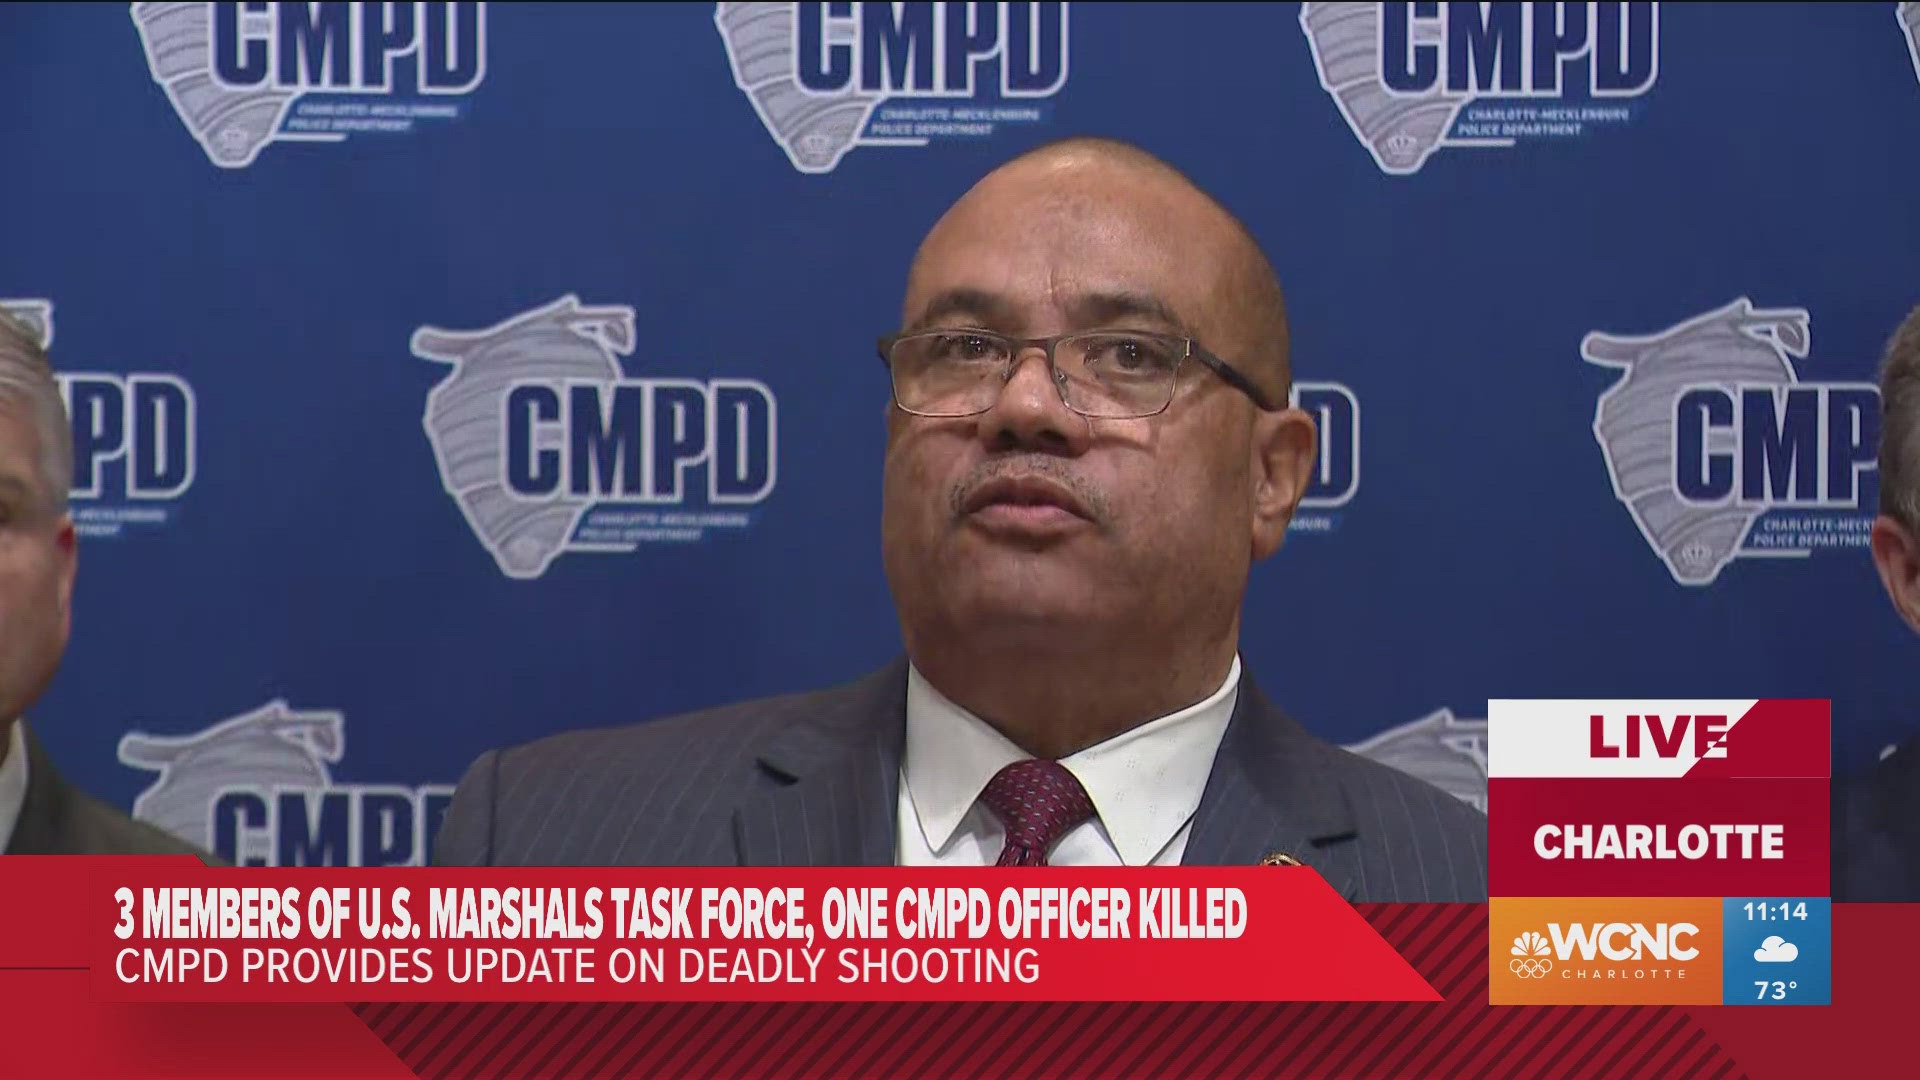 The director of the U.S. Marshals service identifies the marshal who was among those killed in a Charlotte shooting Monday.